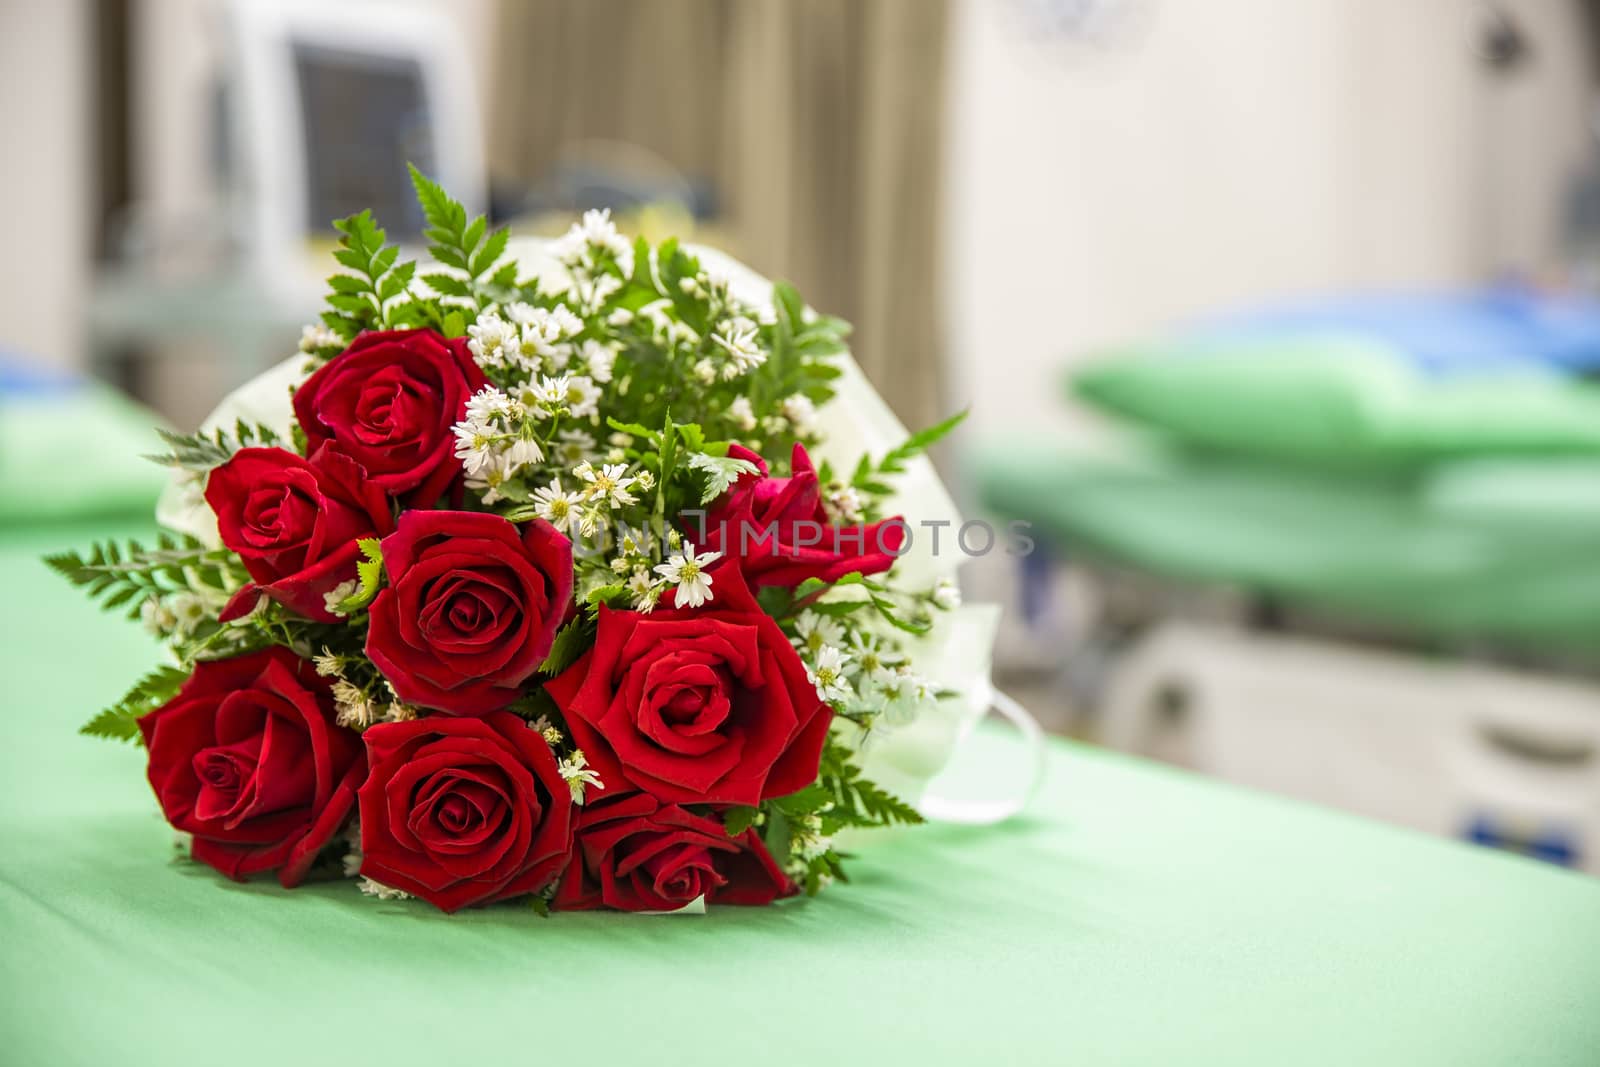 a bouquet of red roses on a hospital bed. Blurred hospital environment background. Medicine concept.